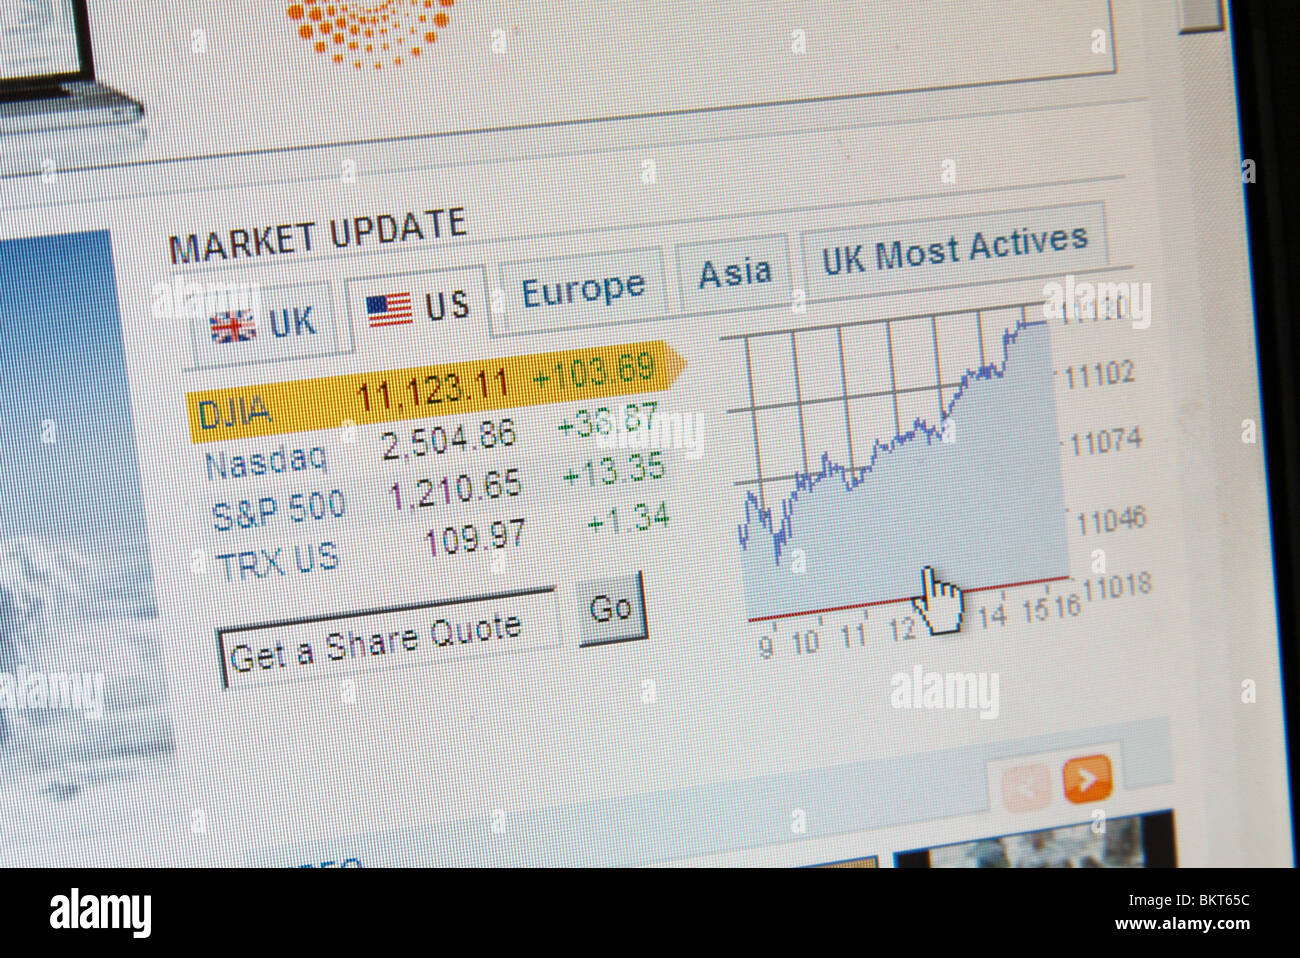 Screenshot showing stock market fluctuations for the Dow Jones, Nasdaq and other stock markets. Apr 2010 Stock Photo